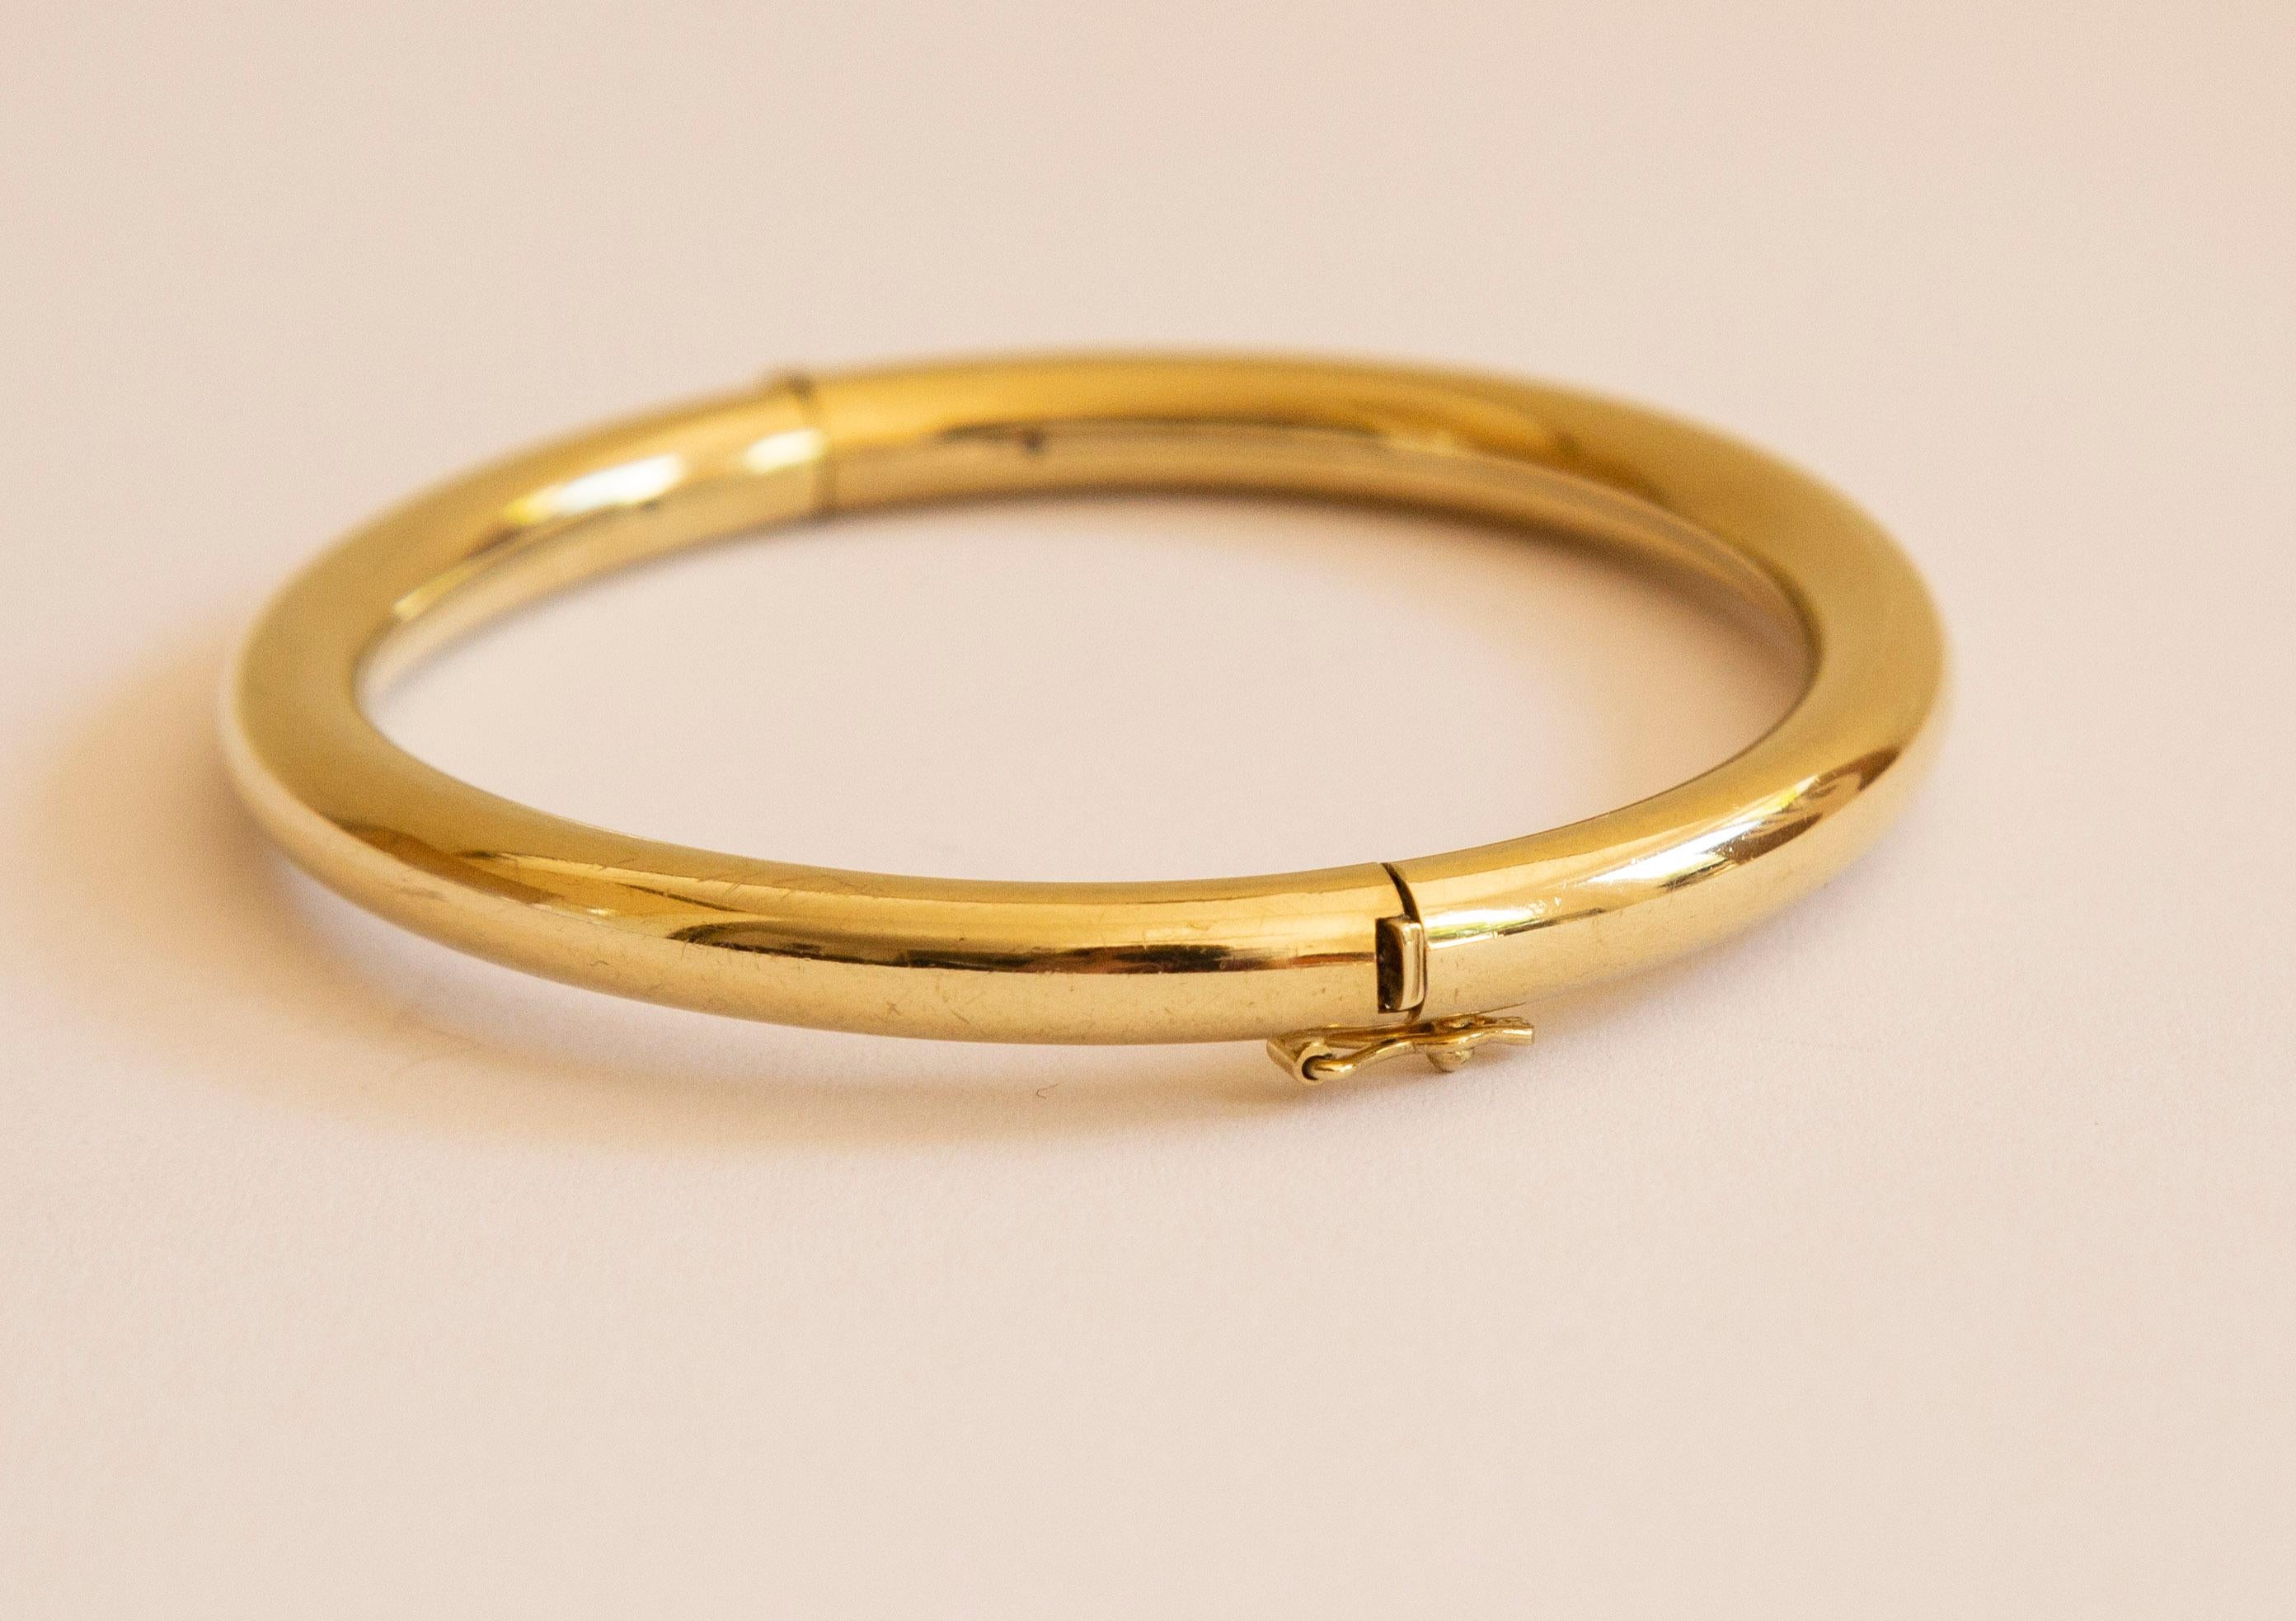 A vintage bangle, rigid bracelet made of 14 karat solid yellow gold. The bracelet features a hinge in the middle and a box clasp and safety figure eight lock. The bracelet is in good vintage condition with superficial tiny and fine scratches visible